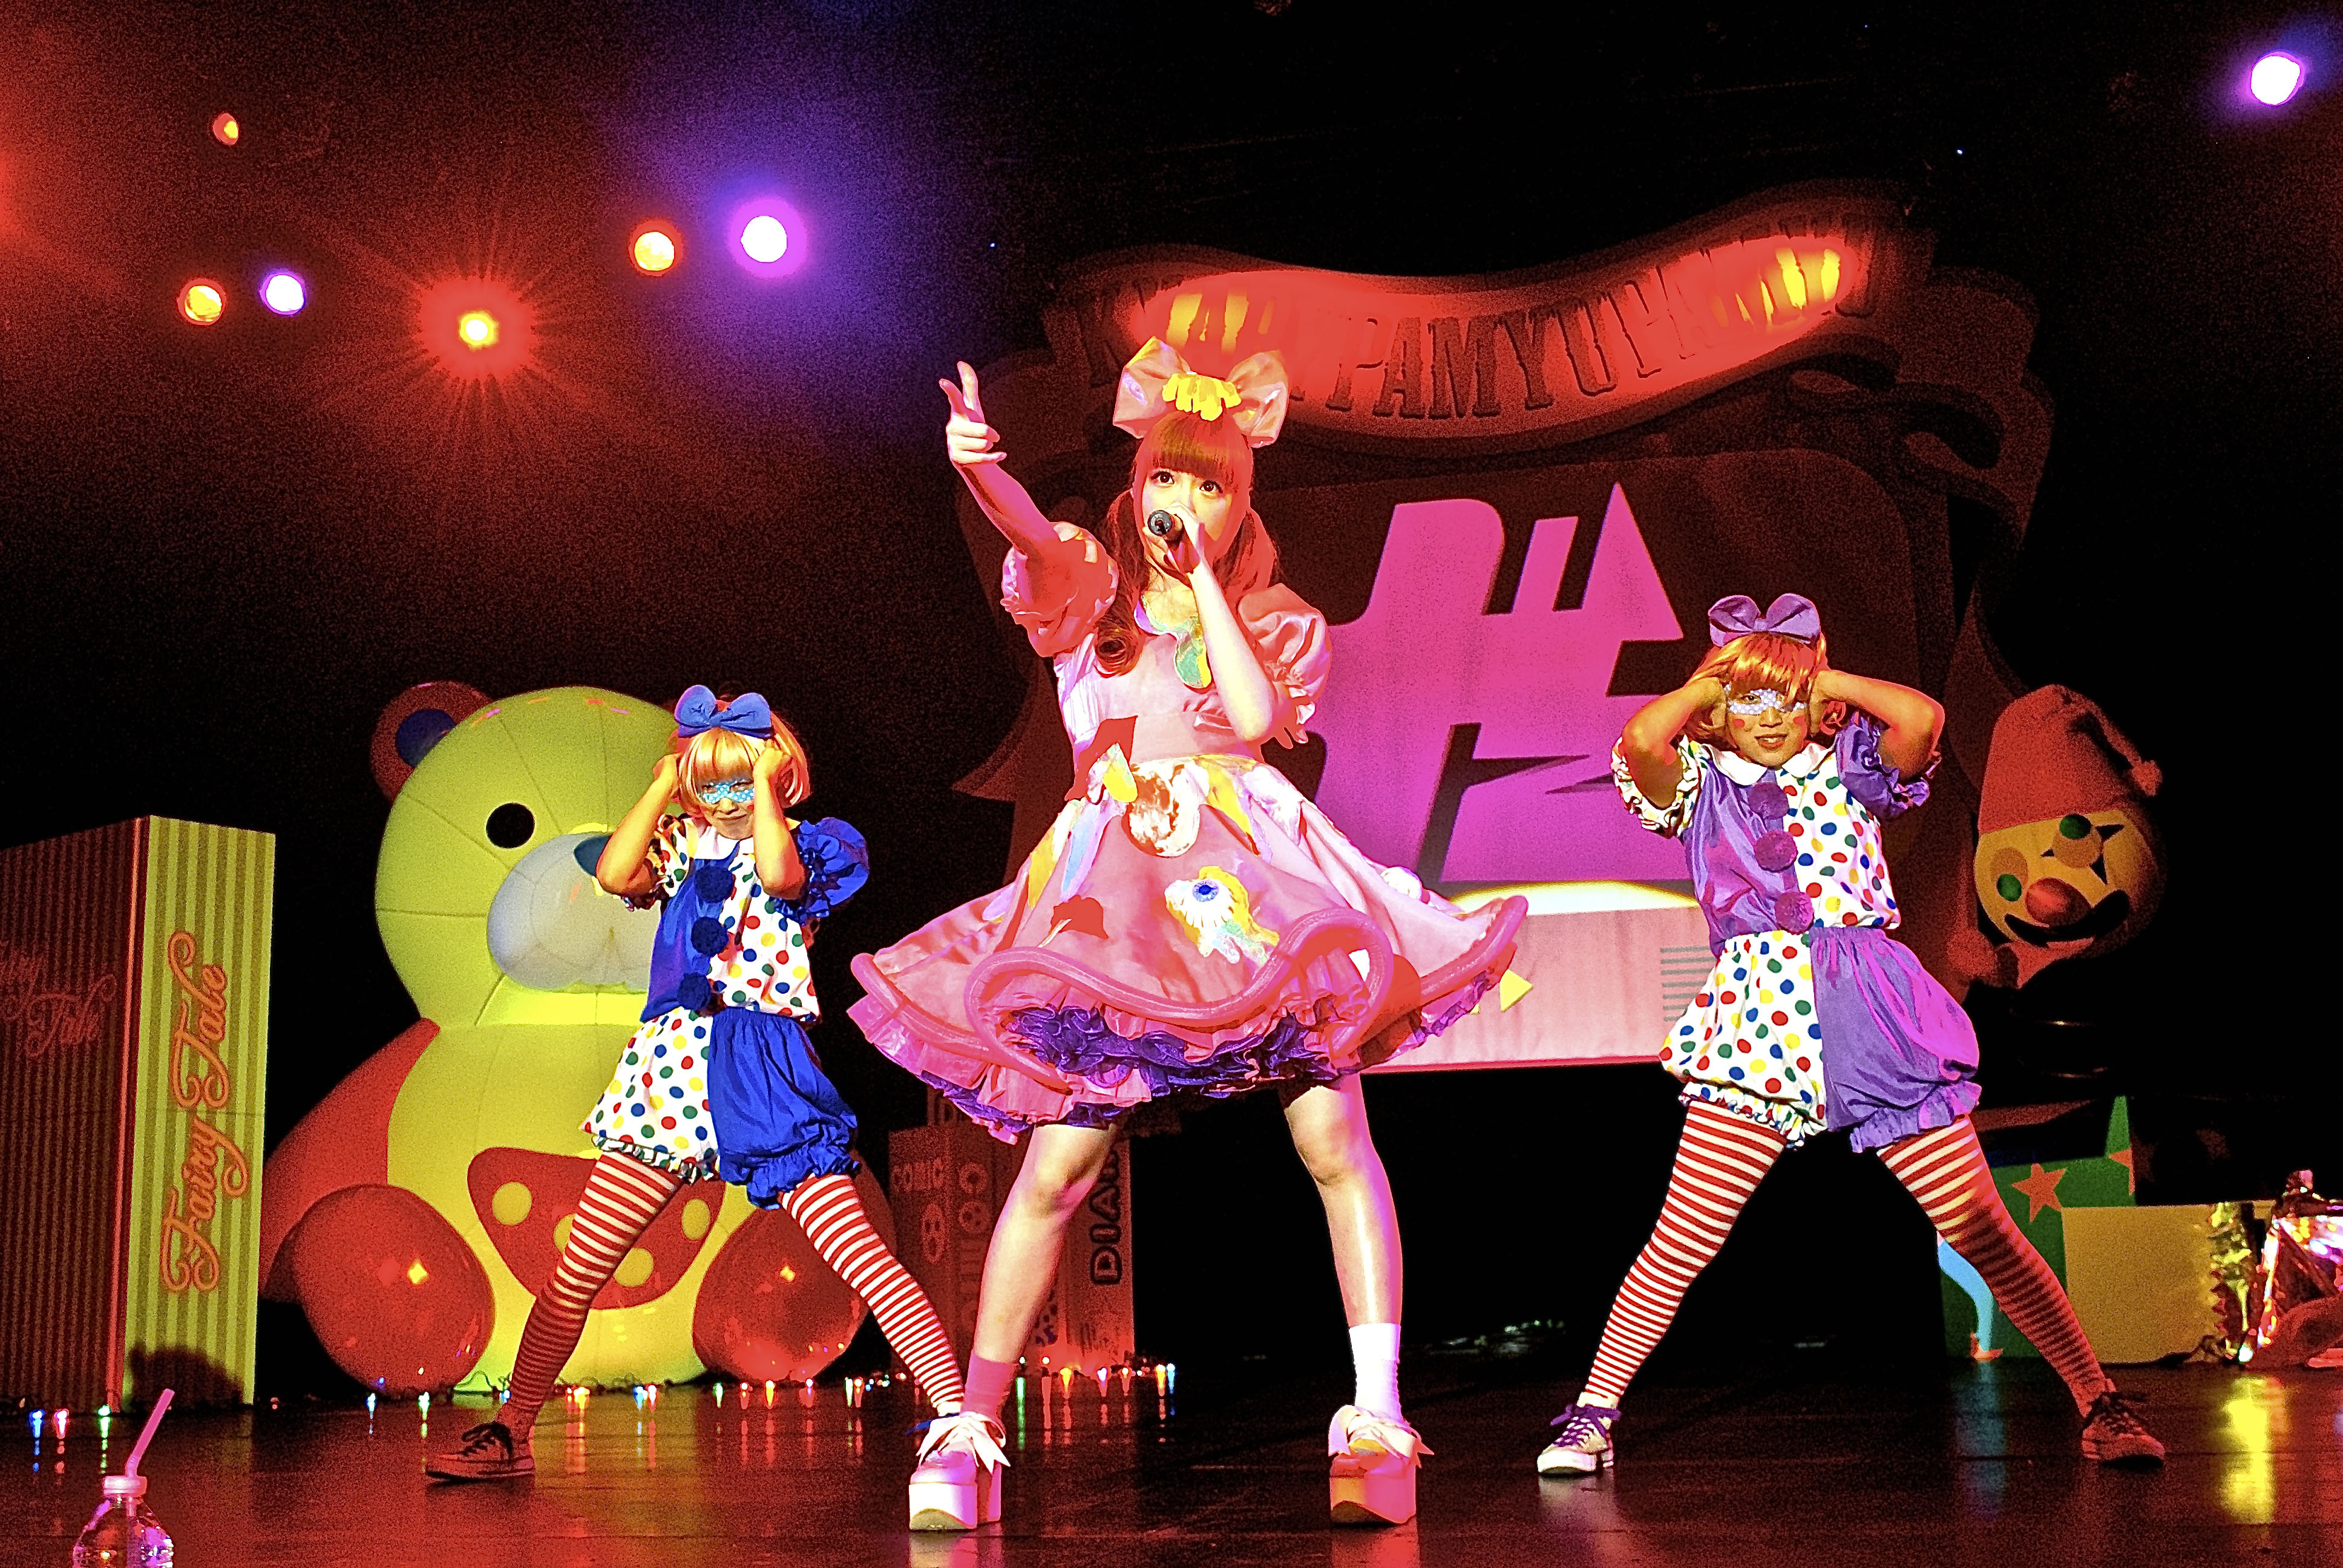 NYC fans of Kyary Pamyu Pamyu share 'zest for life' | The Japan Times